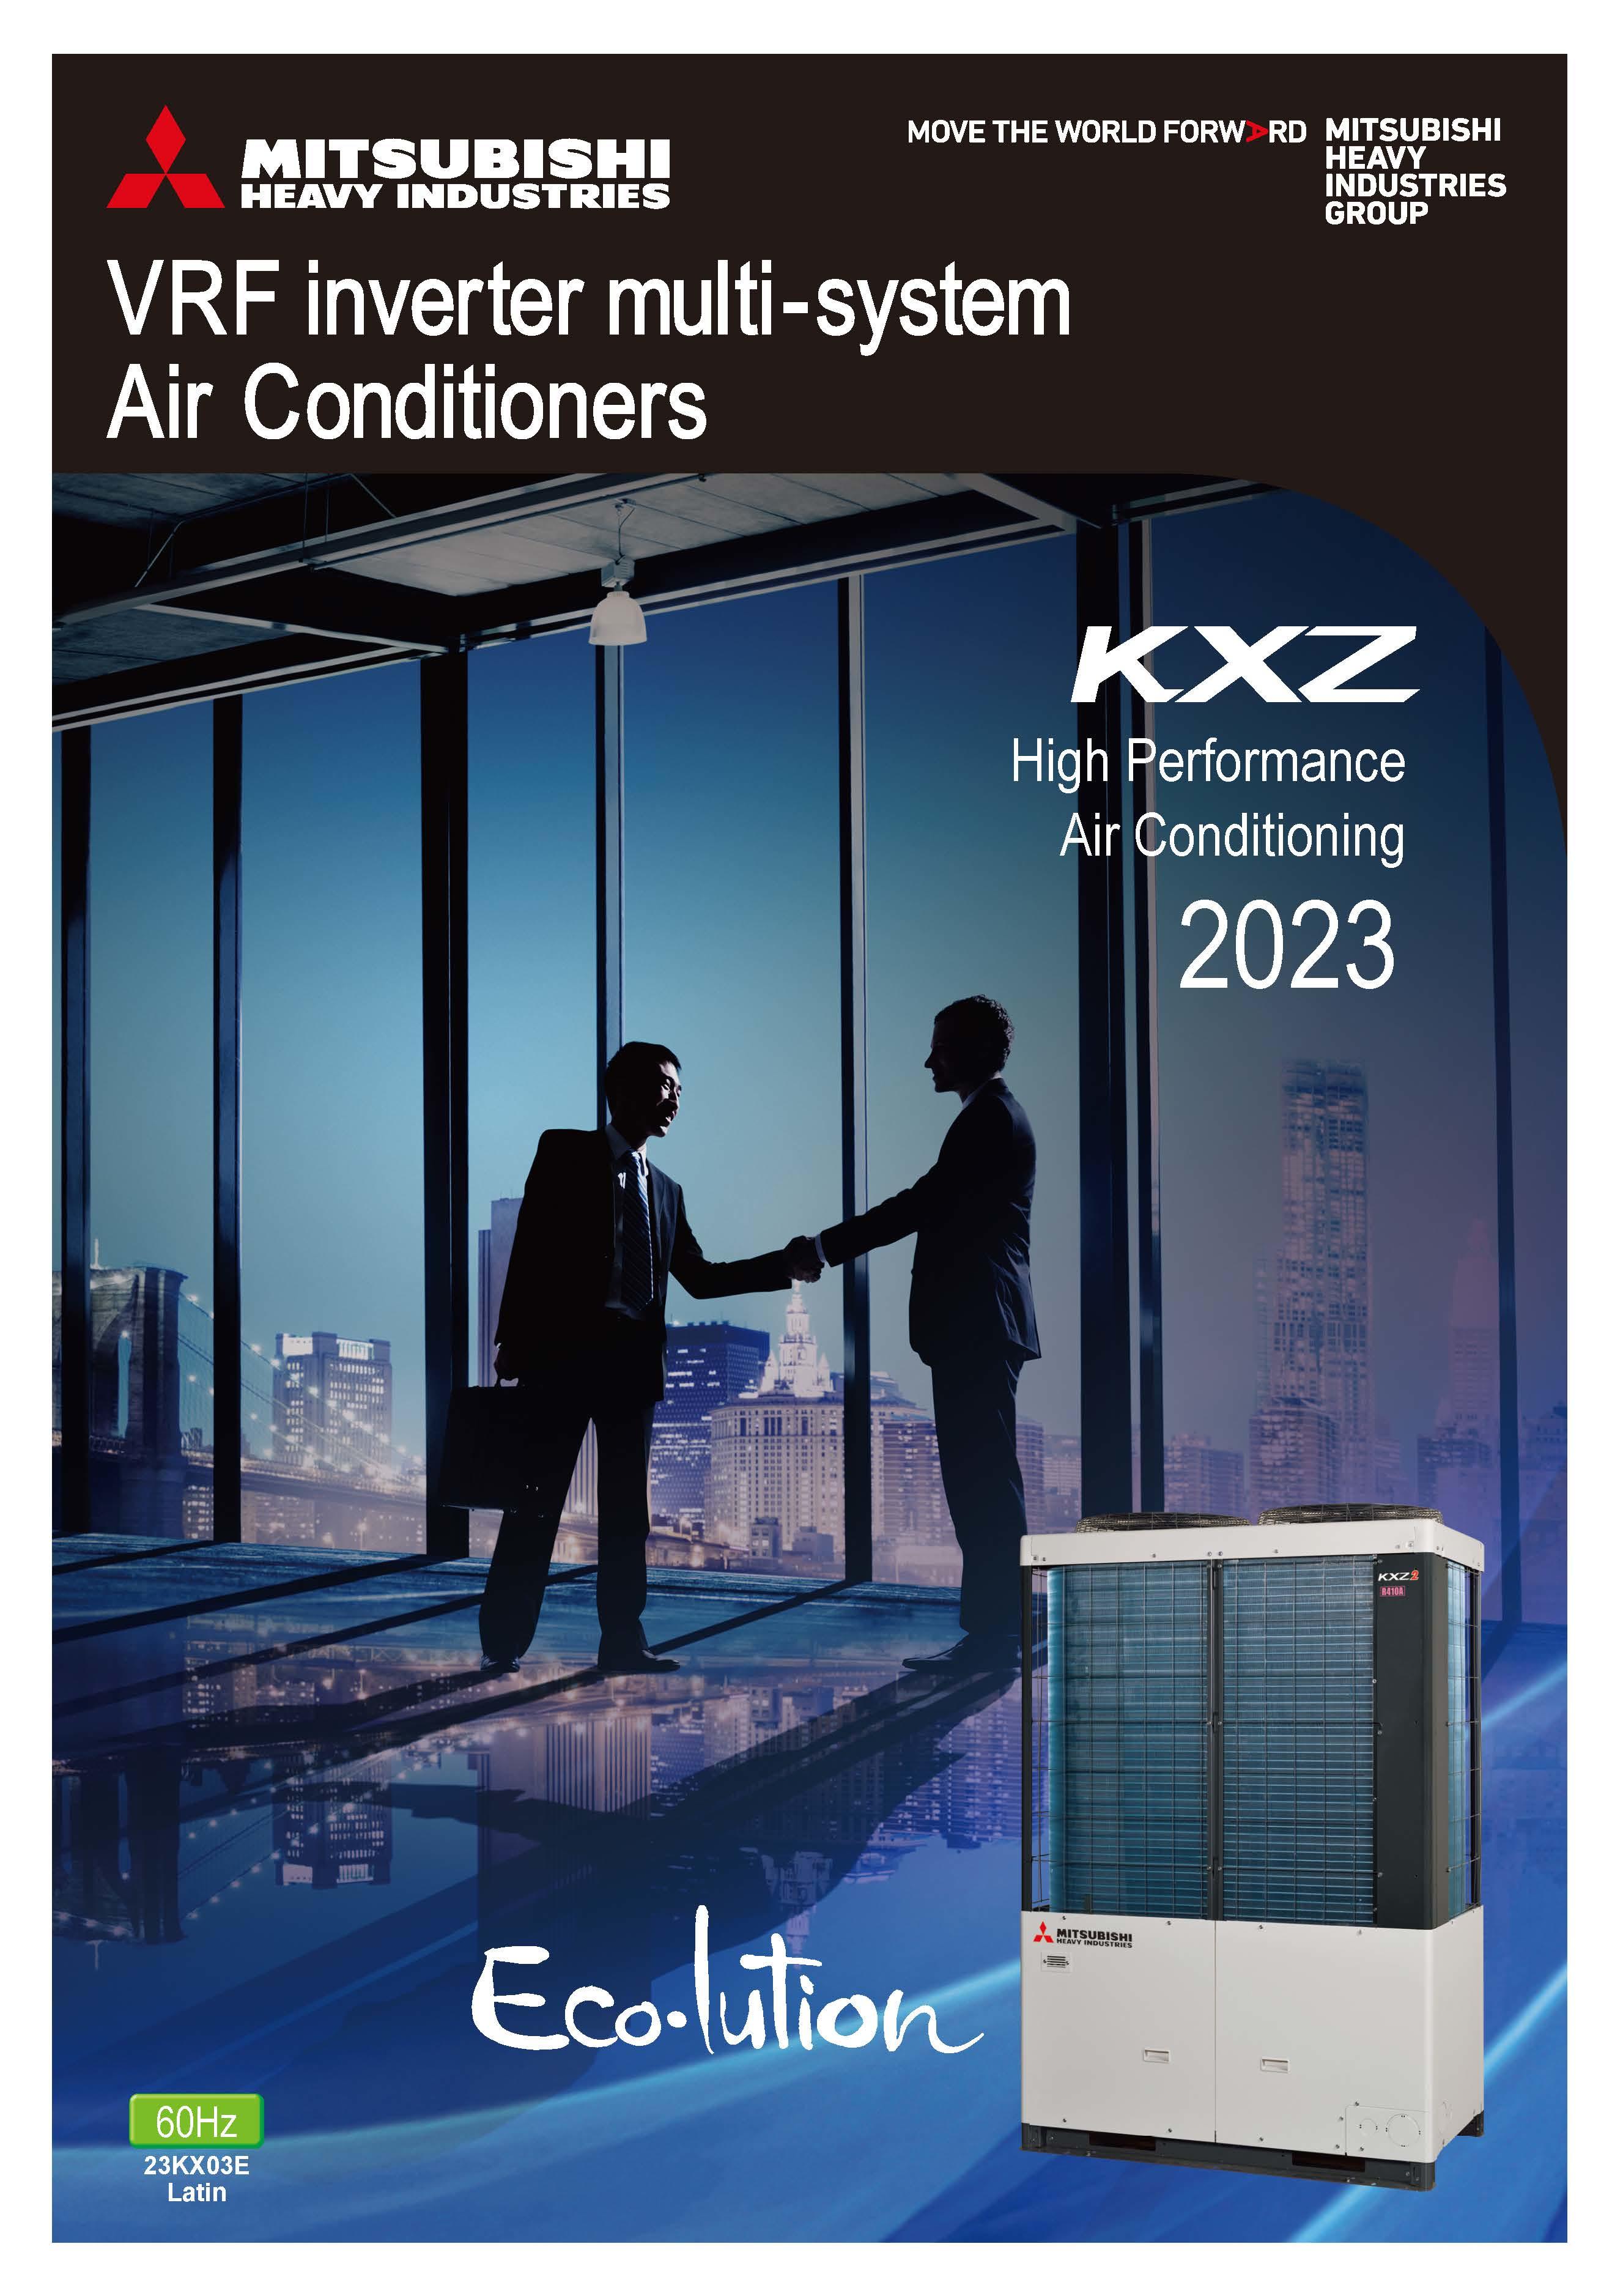 KXZ High Performance Air-Conditioners 2023